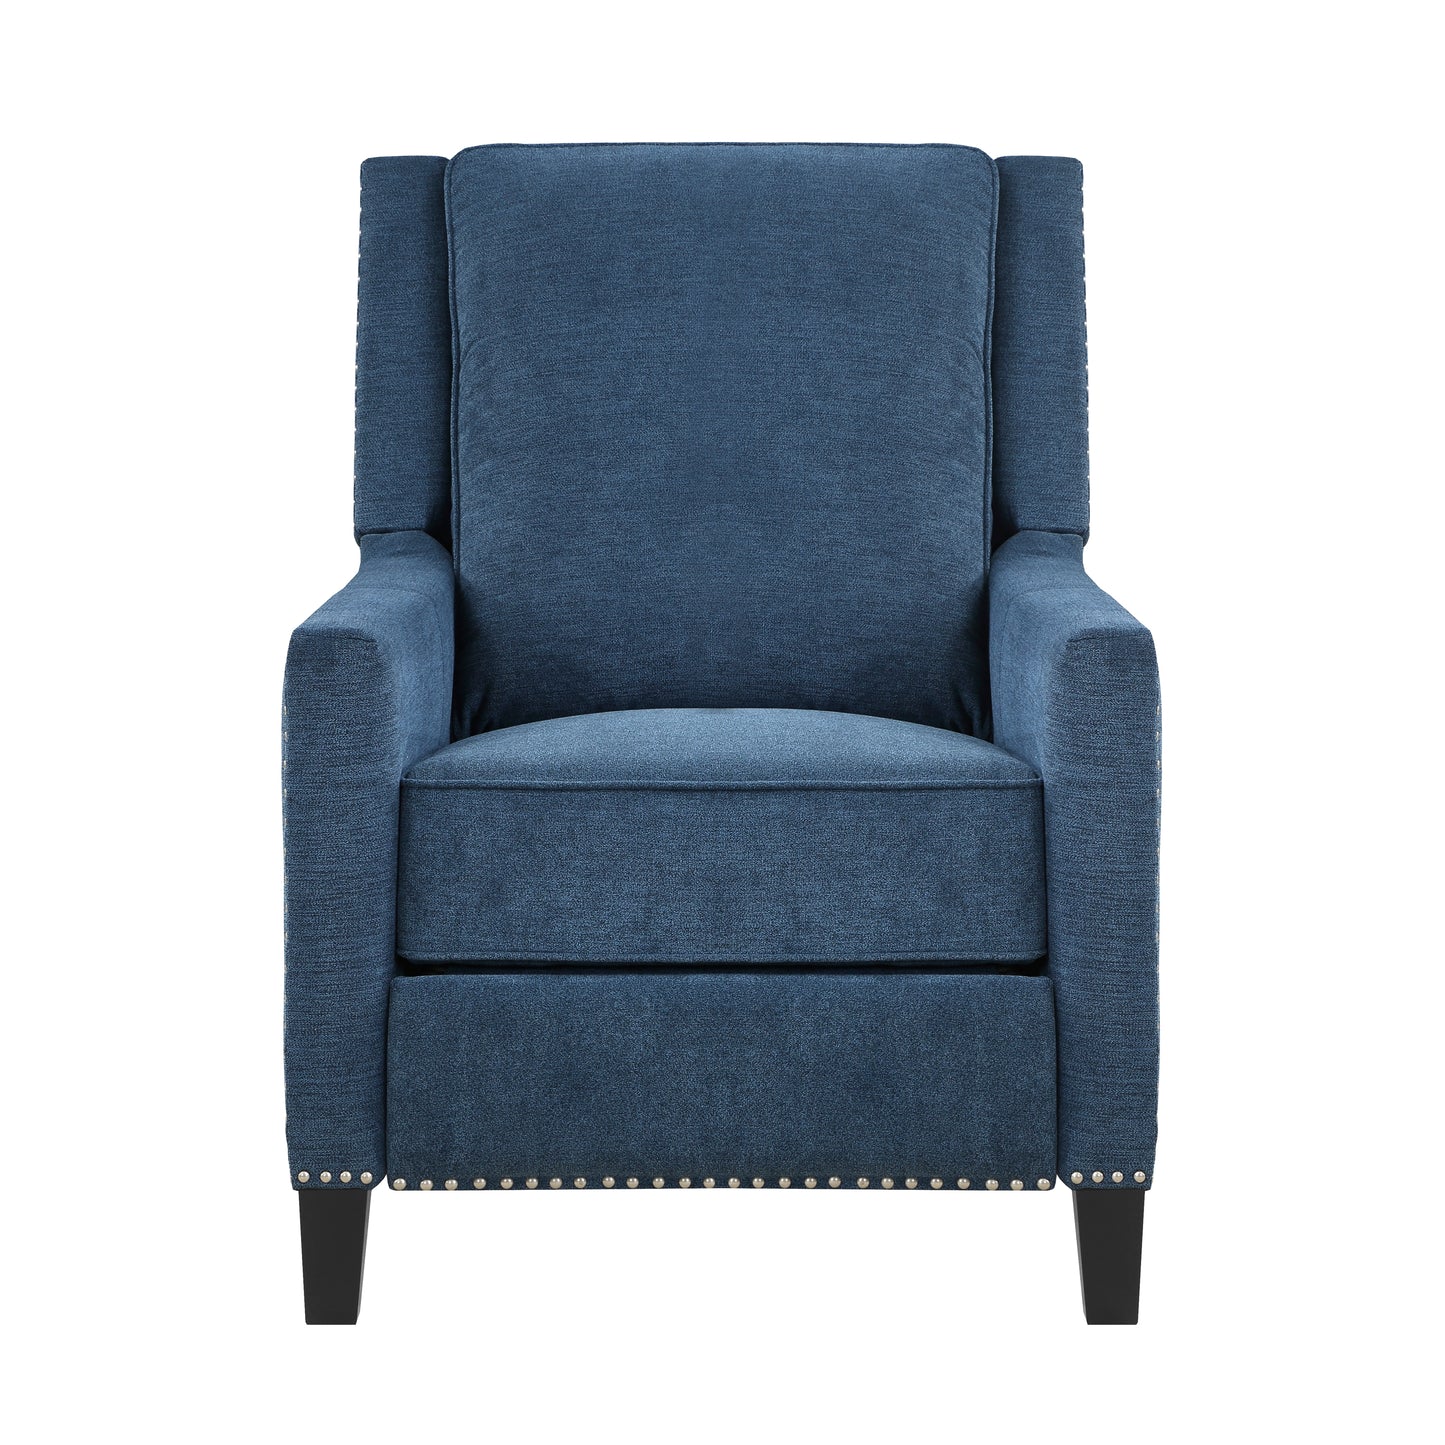 Banks Push Back Recliner Chair BLUE